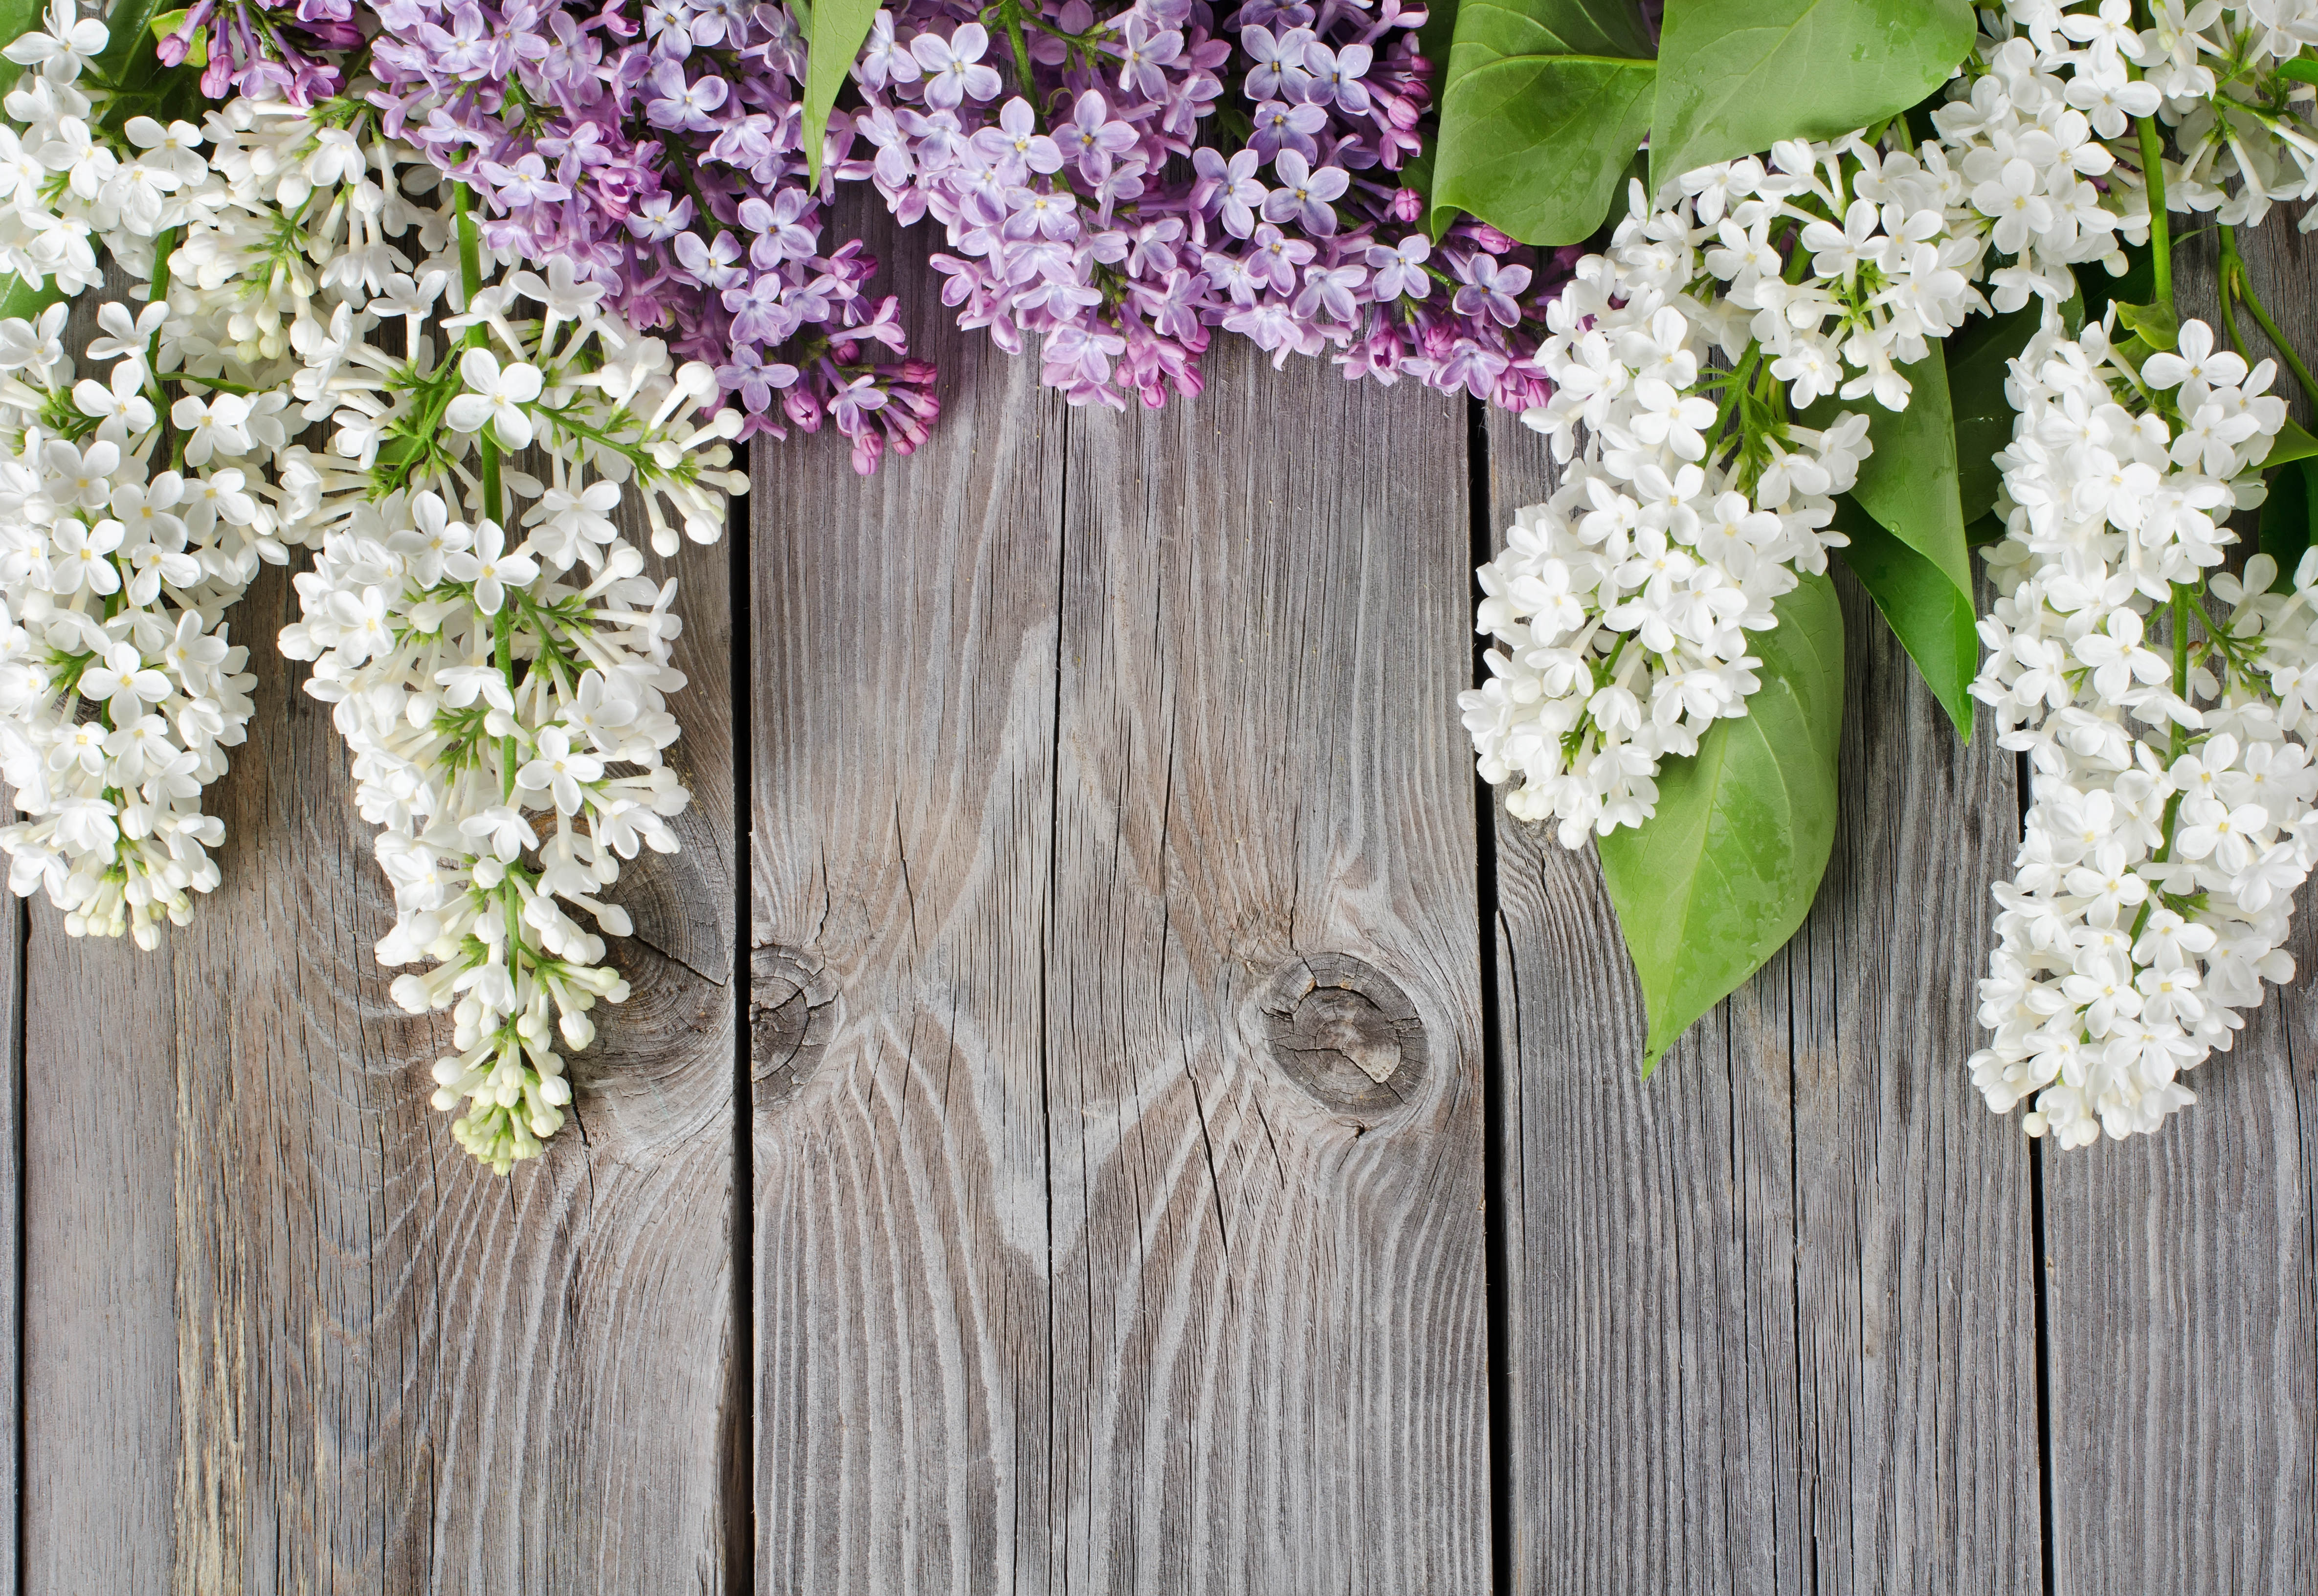 Find more Wallpaper lilac board wood background wallpapers flowers download...